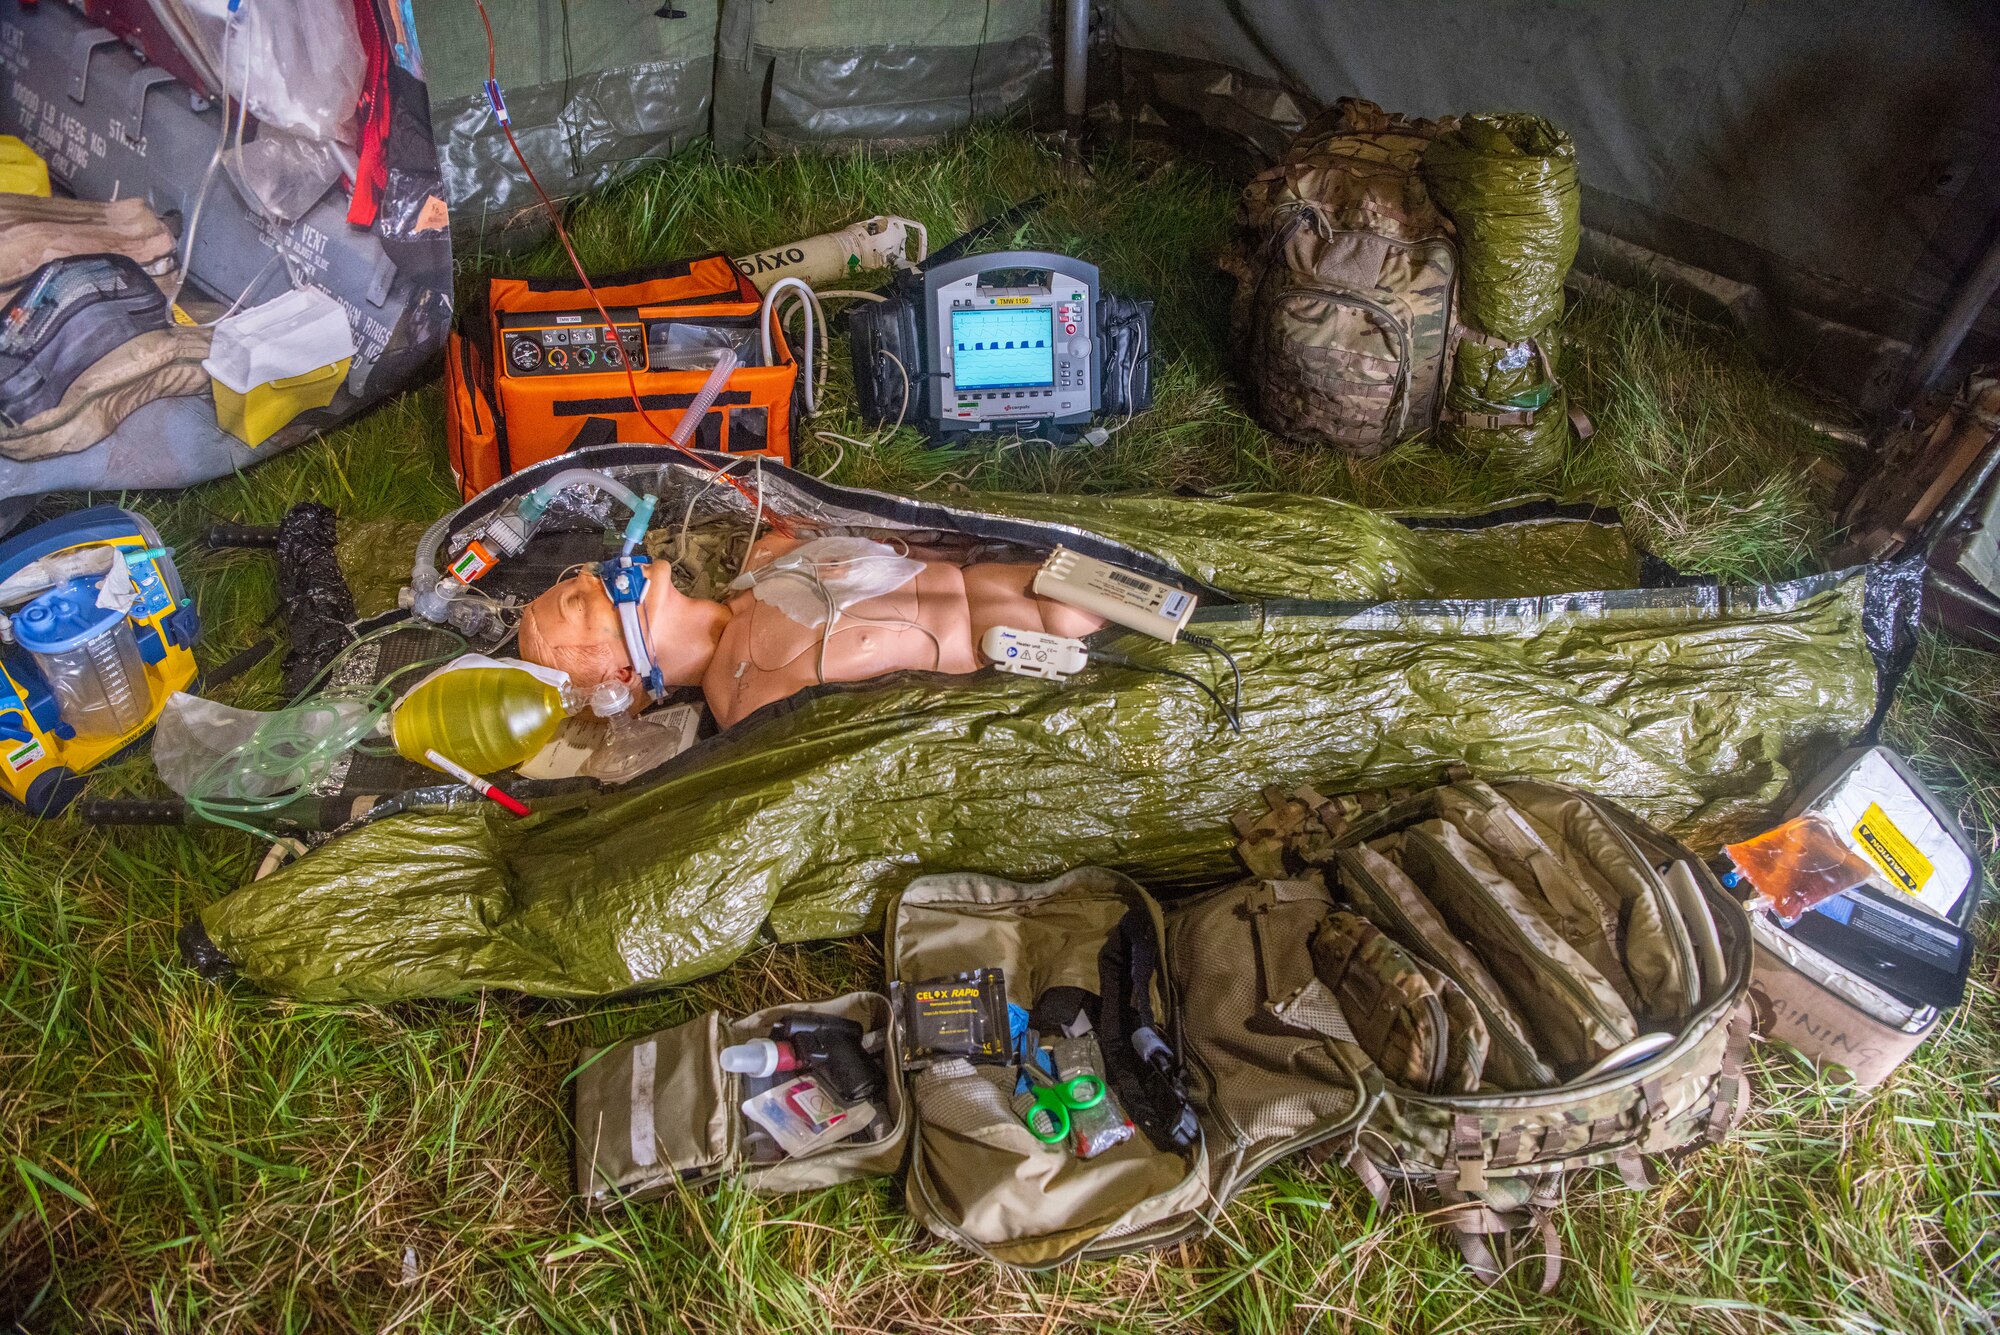 Medical equipment lies on the ground at Royal Air Force Waddington, England, Oct. 22, 2019. Airmen learned about RAF nursing and aeromedical evacuation capabilities as part of the RAF Air Combat Power visit. (U.S. Air Force photo by Airman 1st Class Joseph Barron)